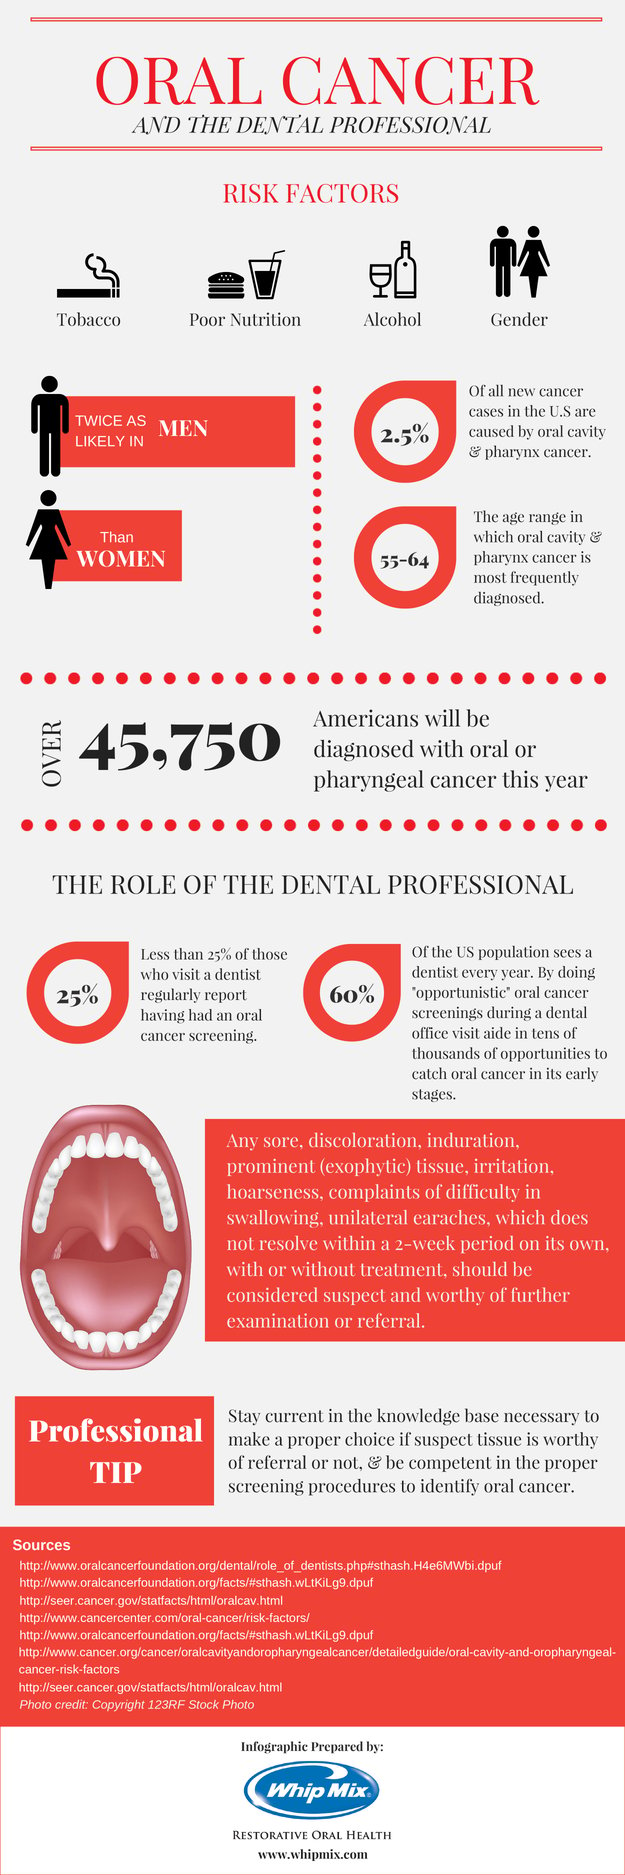 oral-cancer-infographic-whipmix-0415